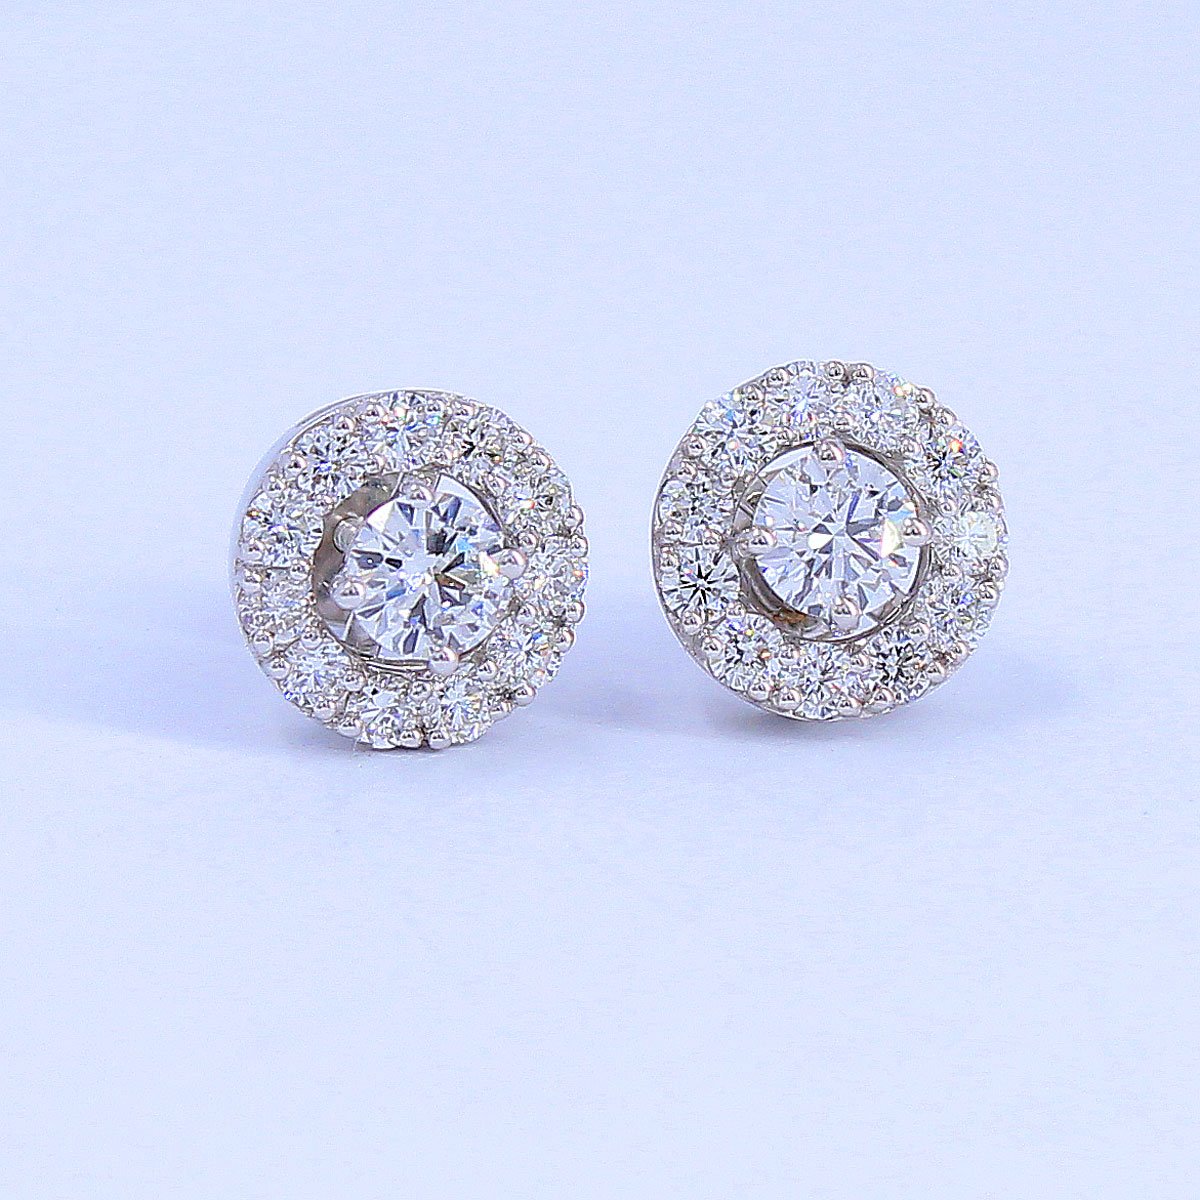 Buy Beautiful Diamond earrings natural  original gemstone stud gold plated  earrings for fashion purpose by Ceylonmine Online  1863 from ShopClues